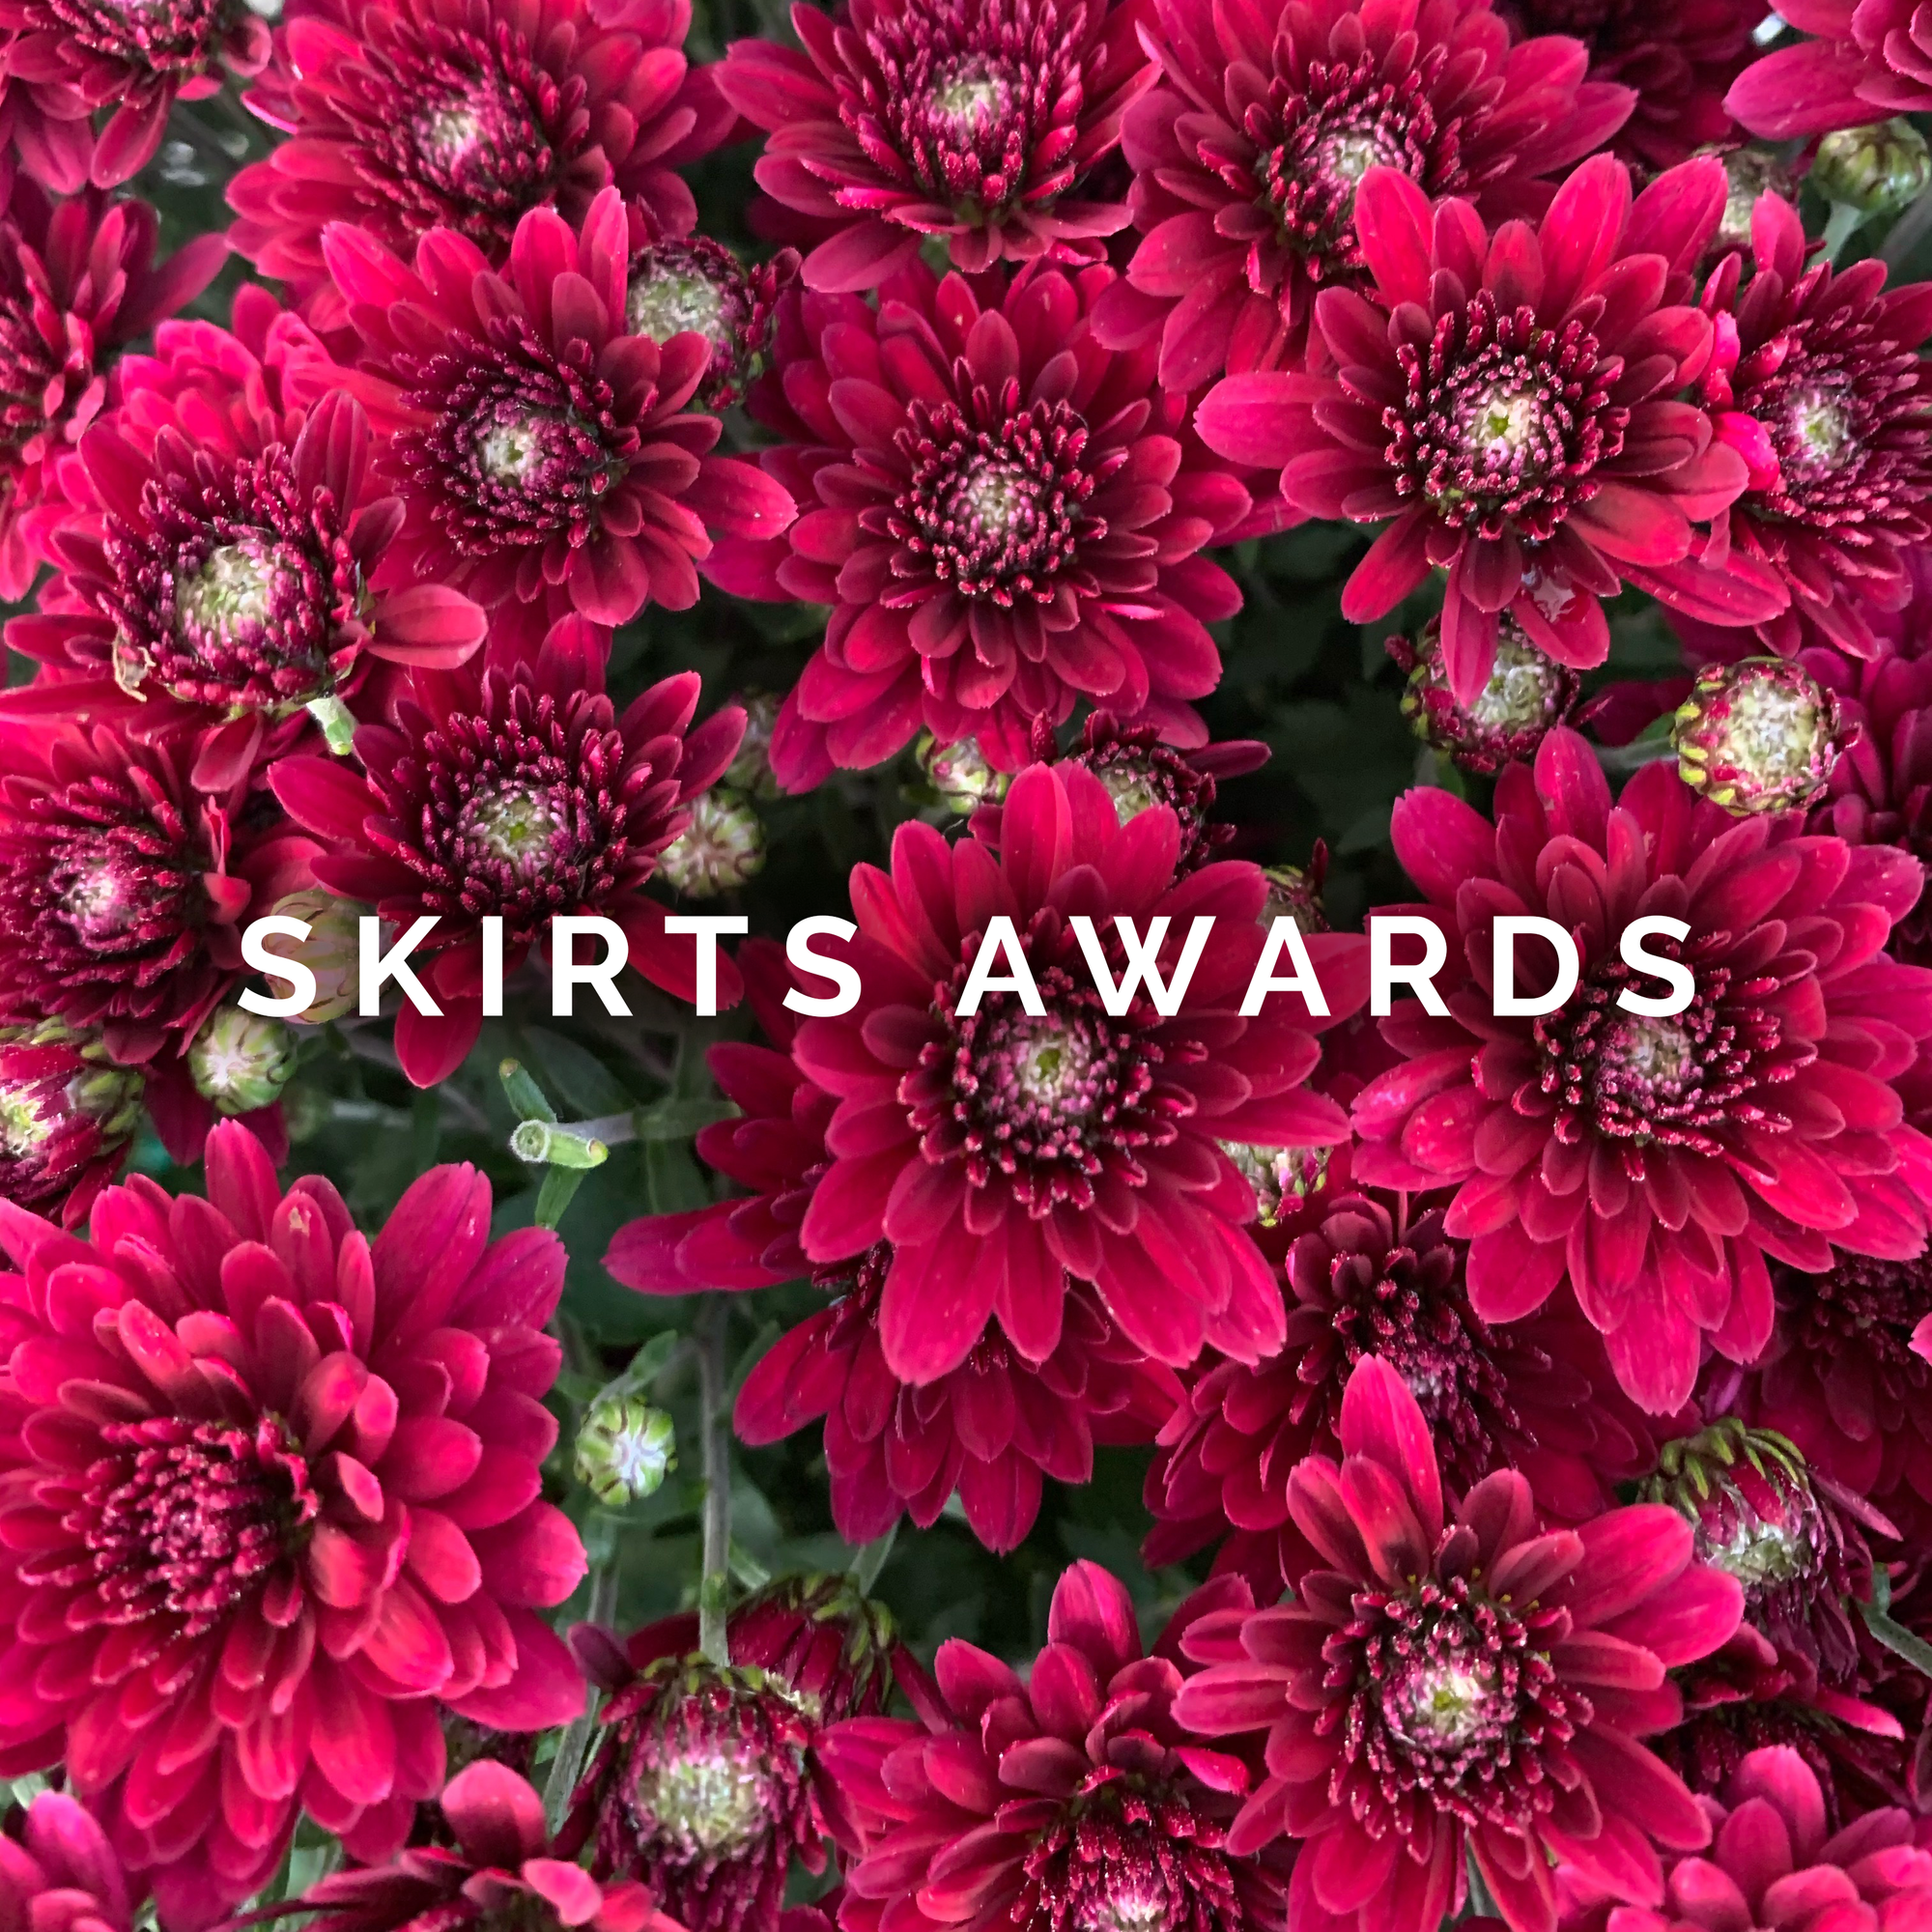 The 2019 Skirts Awards